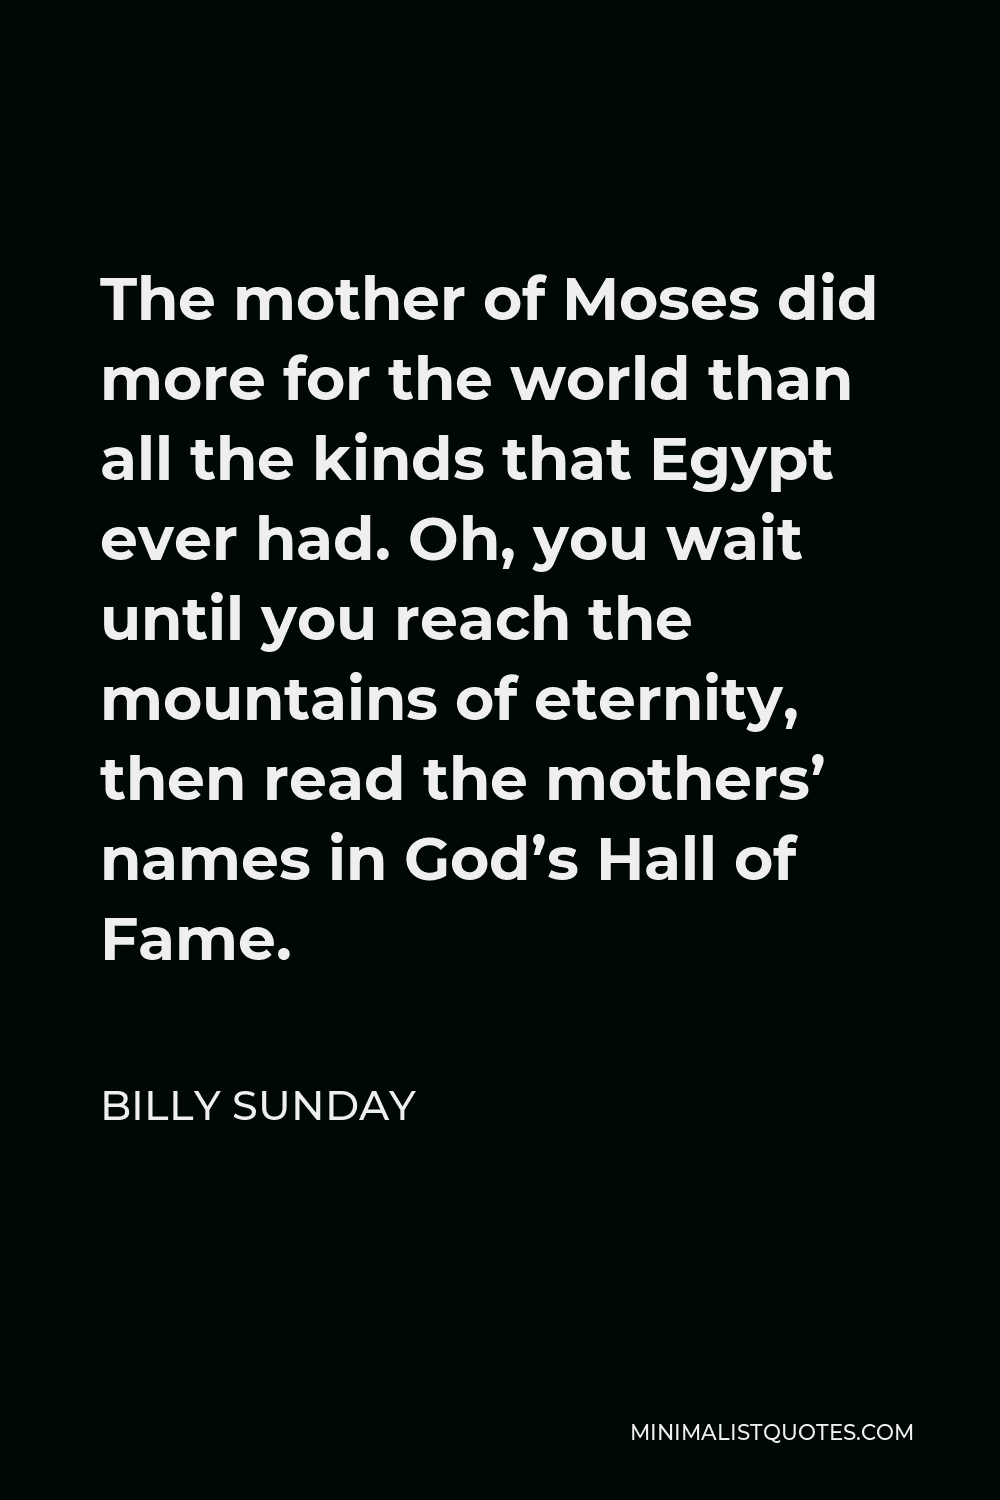 Billy Sunday Quote - The mother of Moses did more for the world than all the kinds that Egypt ever had. Oh, you wait until you reach the mountains of eternity, then read the mothers’ names in God’s Hall of Fame.